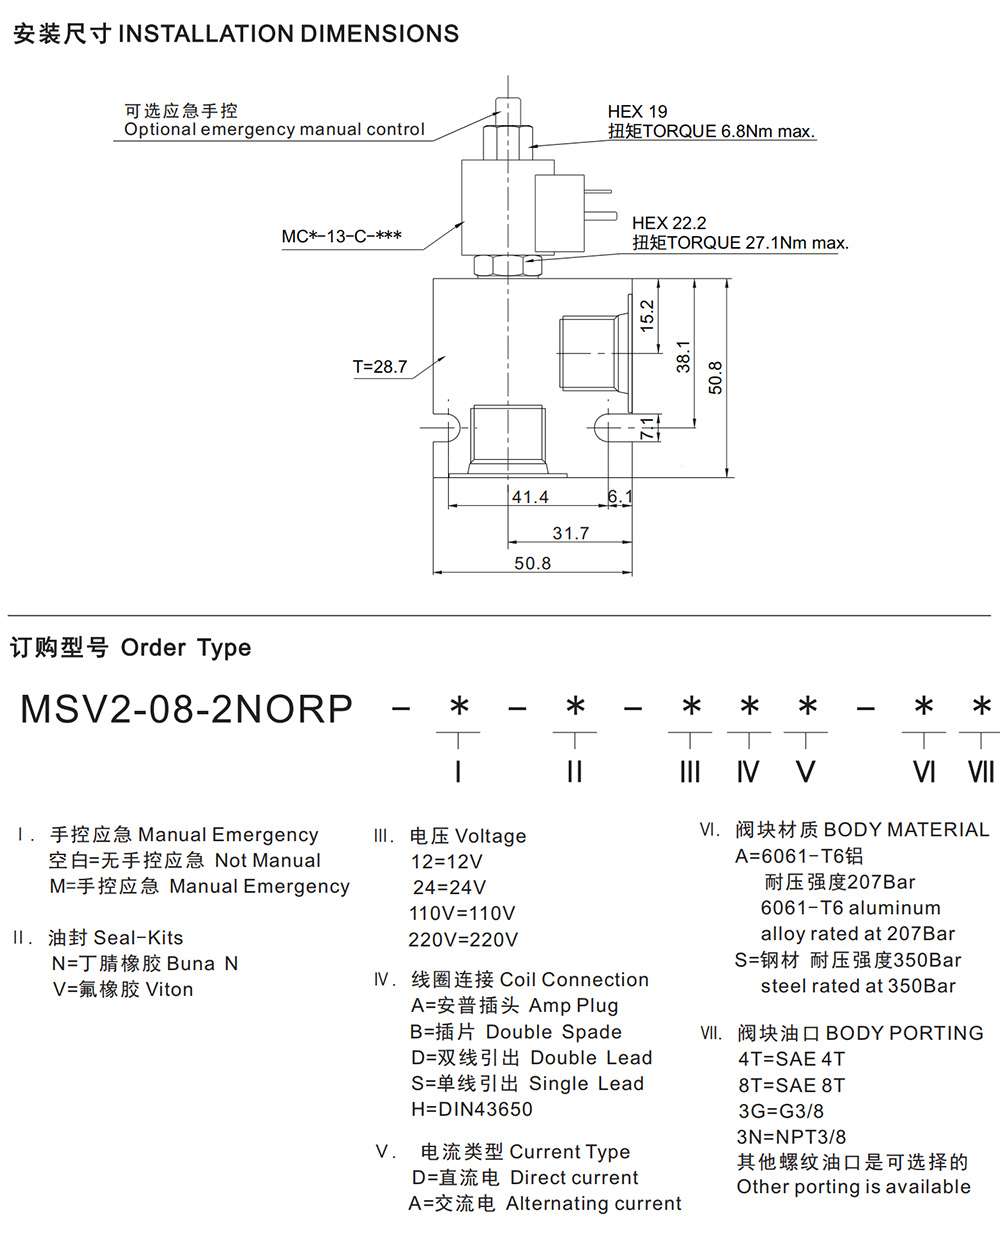 MSV2-08-2NORP